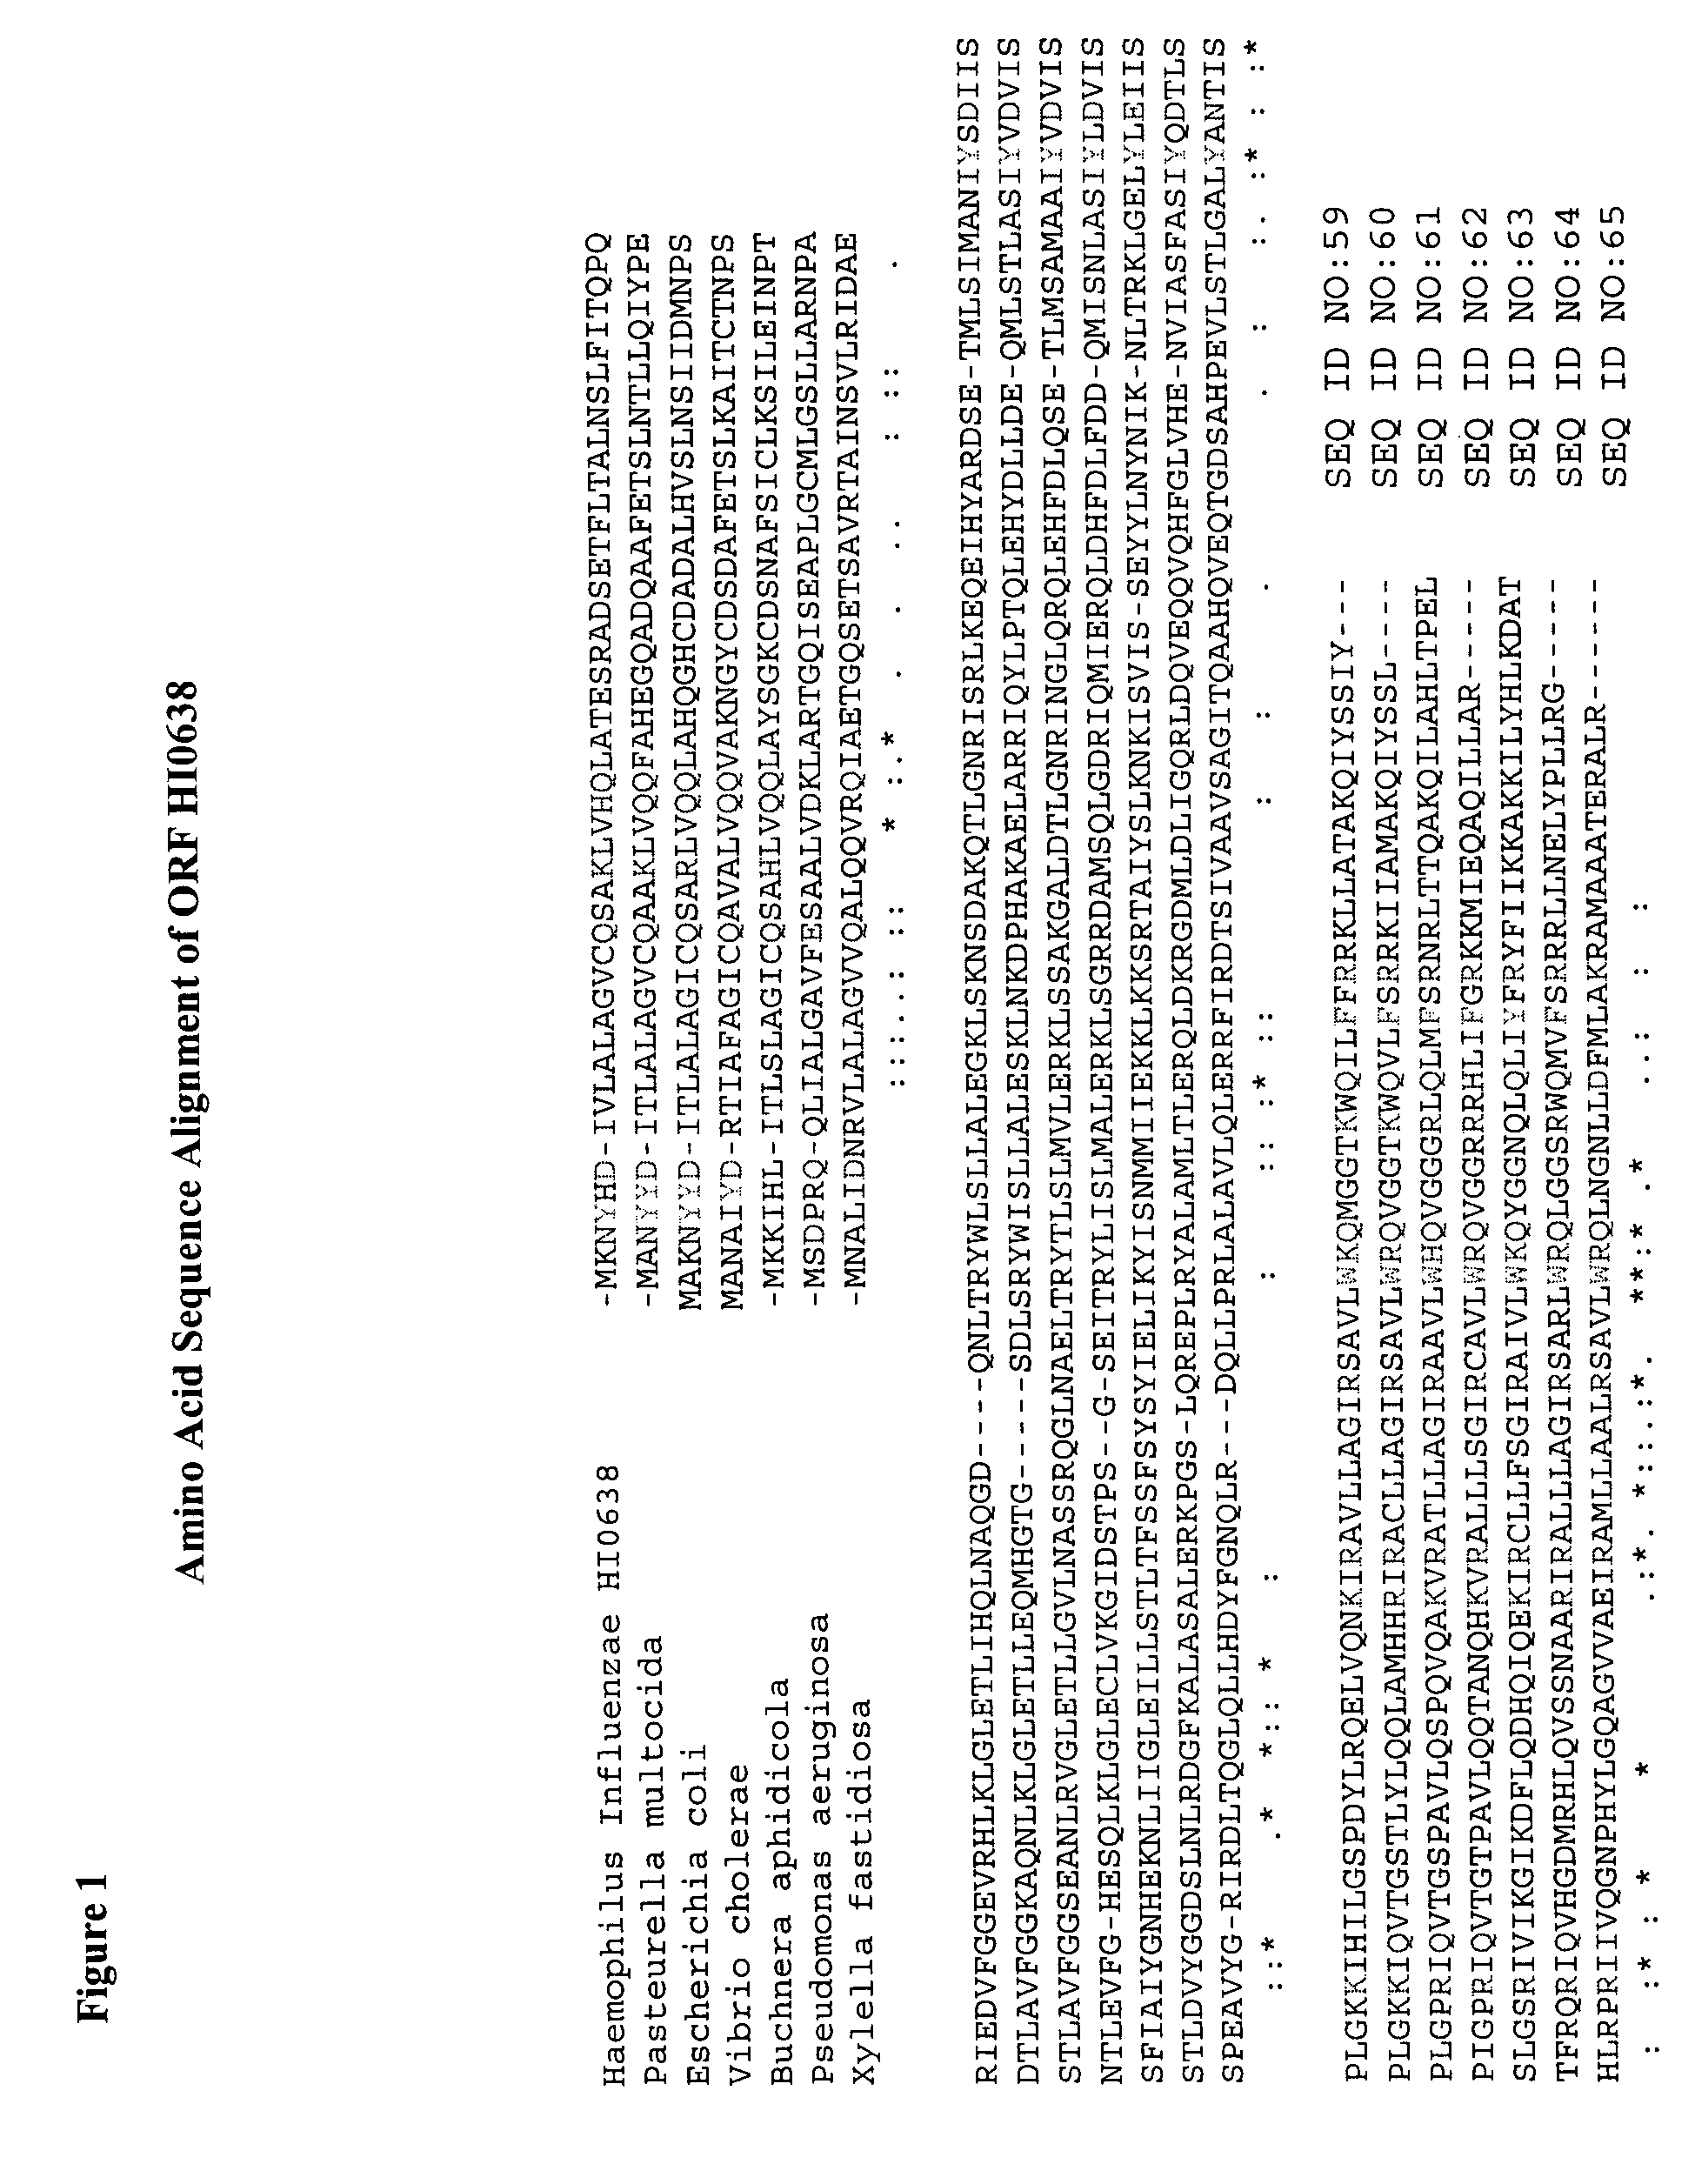 Amino acid sequences capable of facilitating penetration across a biological barrier